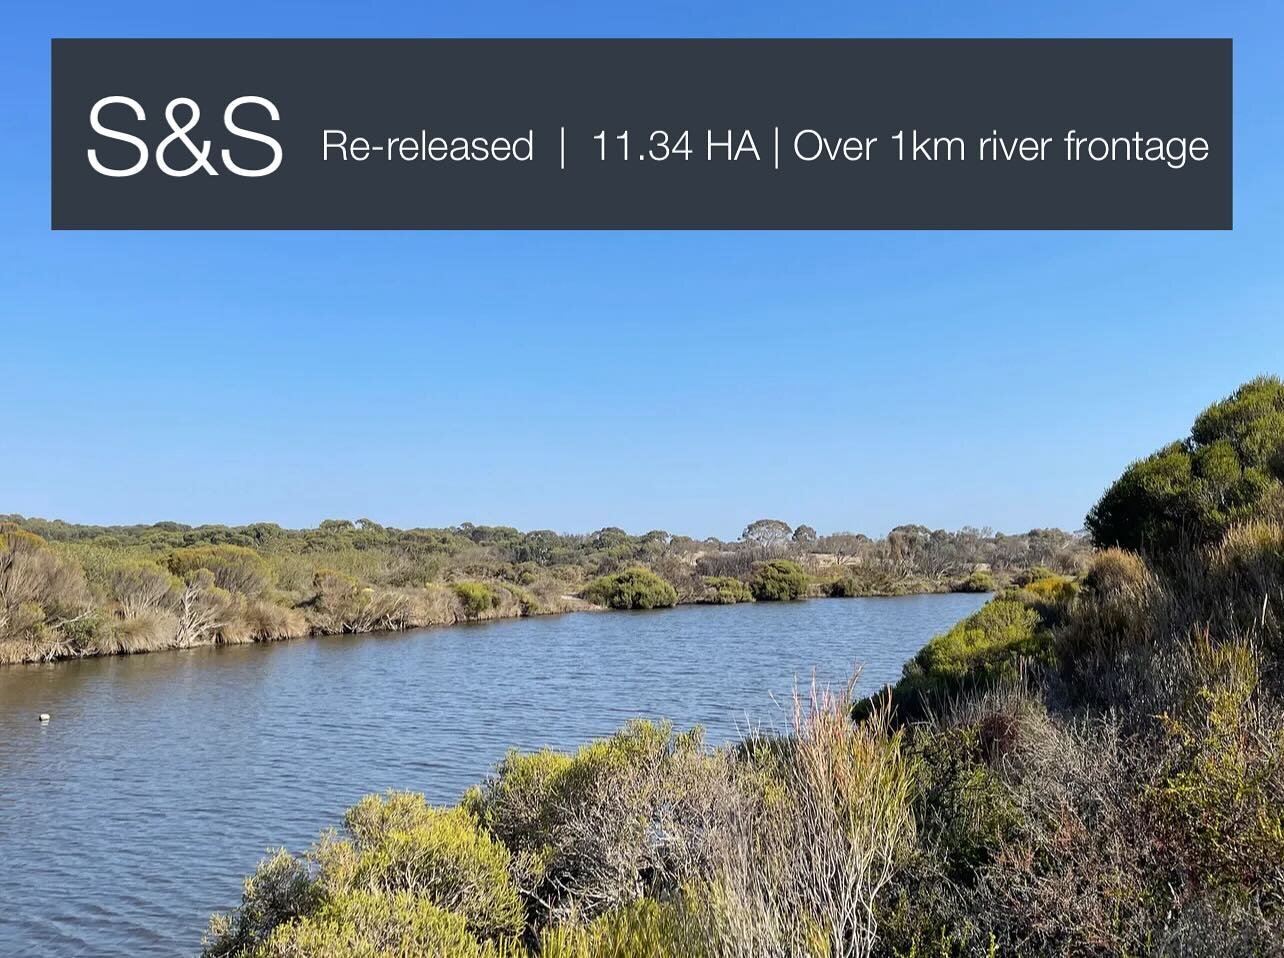 V I V O N N E  B A Y - Back on the market! A stunning parcel of land along the banks of the Harriet River. Could this be your future base for camping with the family? Gorgeous kayaking opportunities. Time to get back to nature 🌿

Sophie 0428922515
R